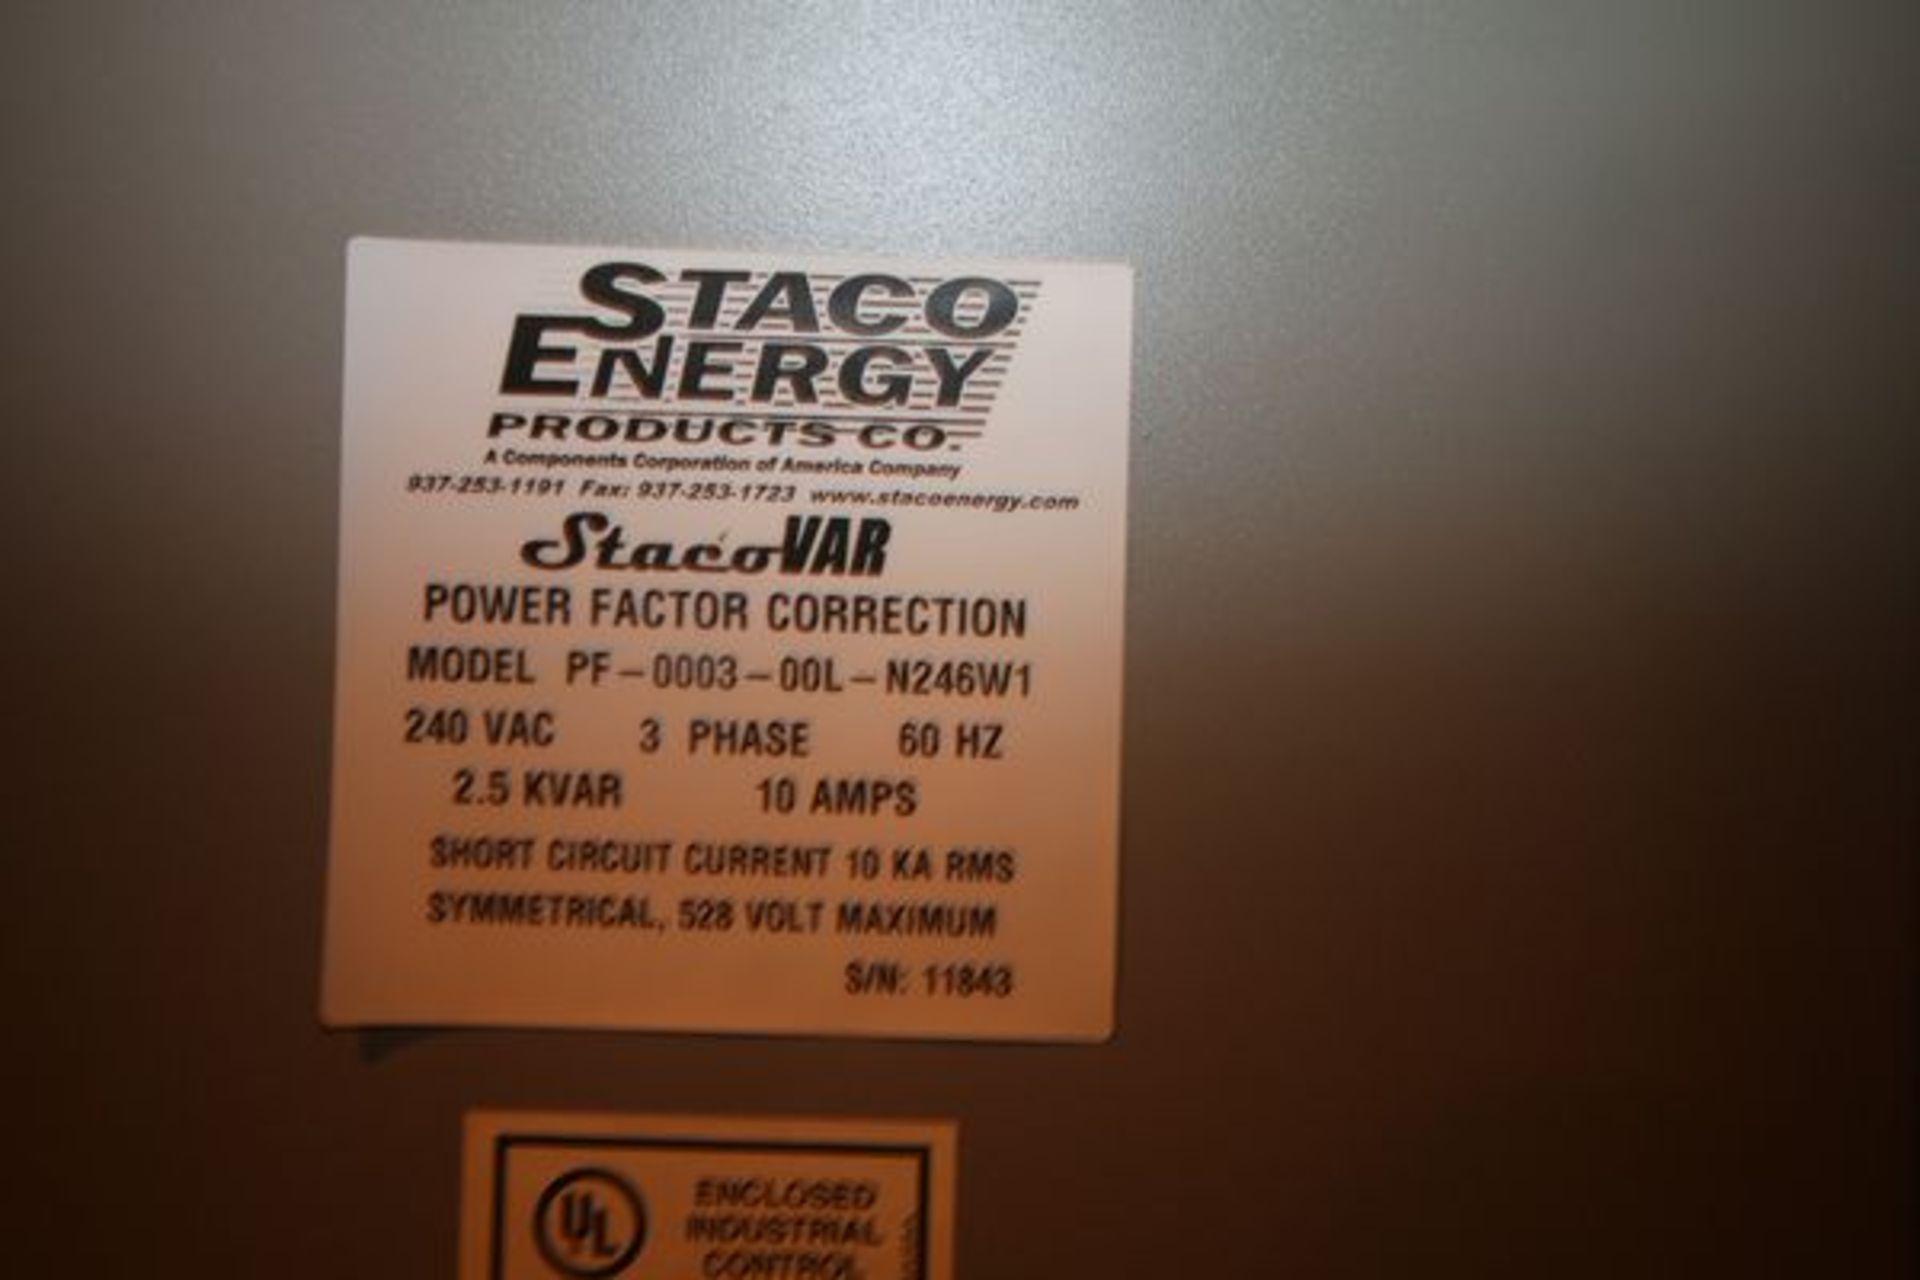 Statco Energy Power Factor Correction Units, Model PF-0002-00L-N486WI, S/N 11843, S/N 11821, S/N - Image 2 of 2